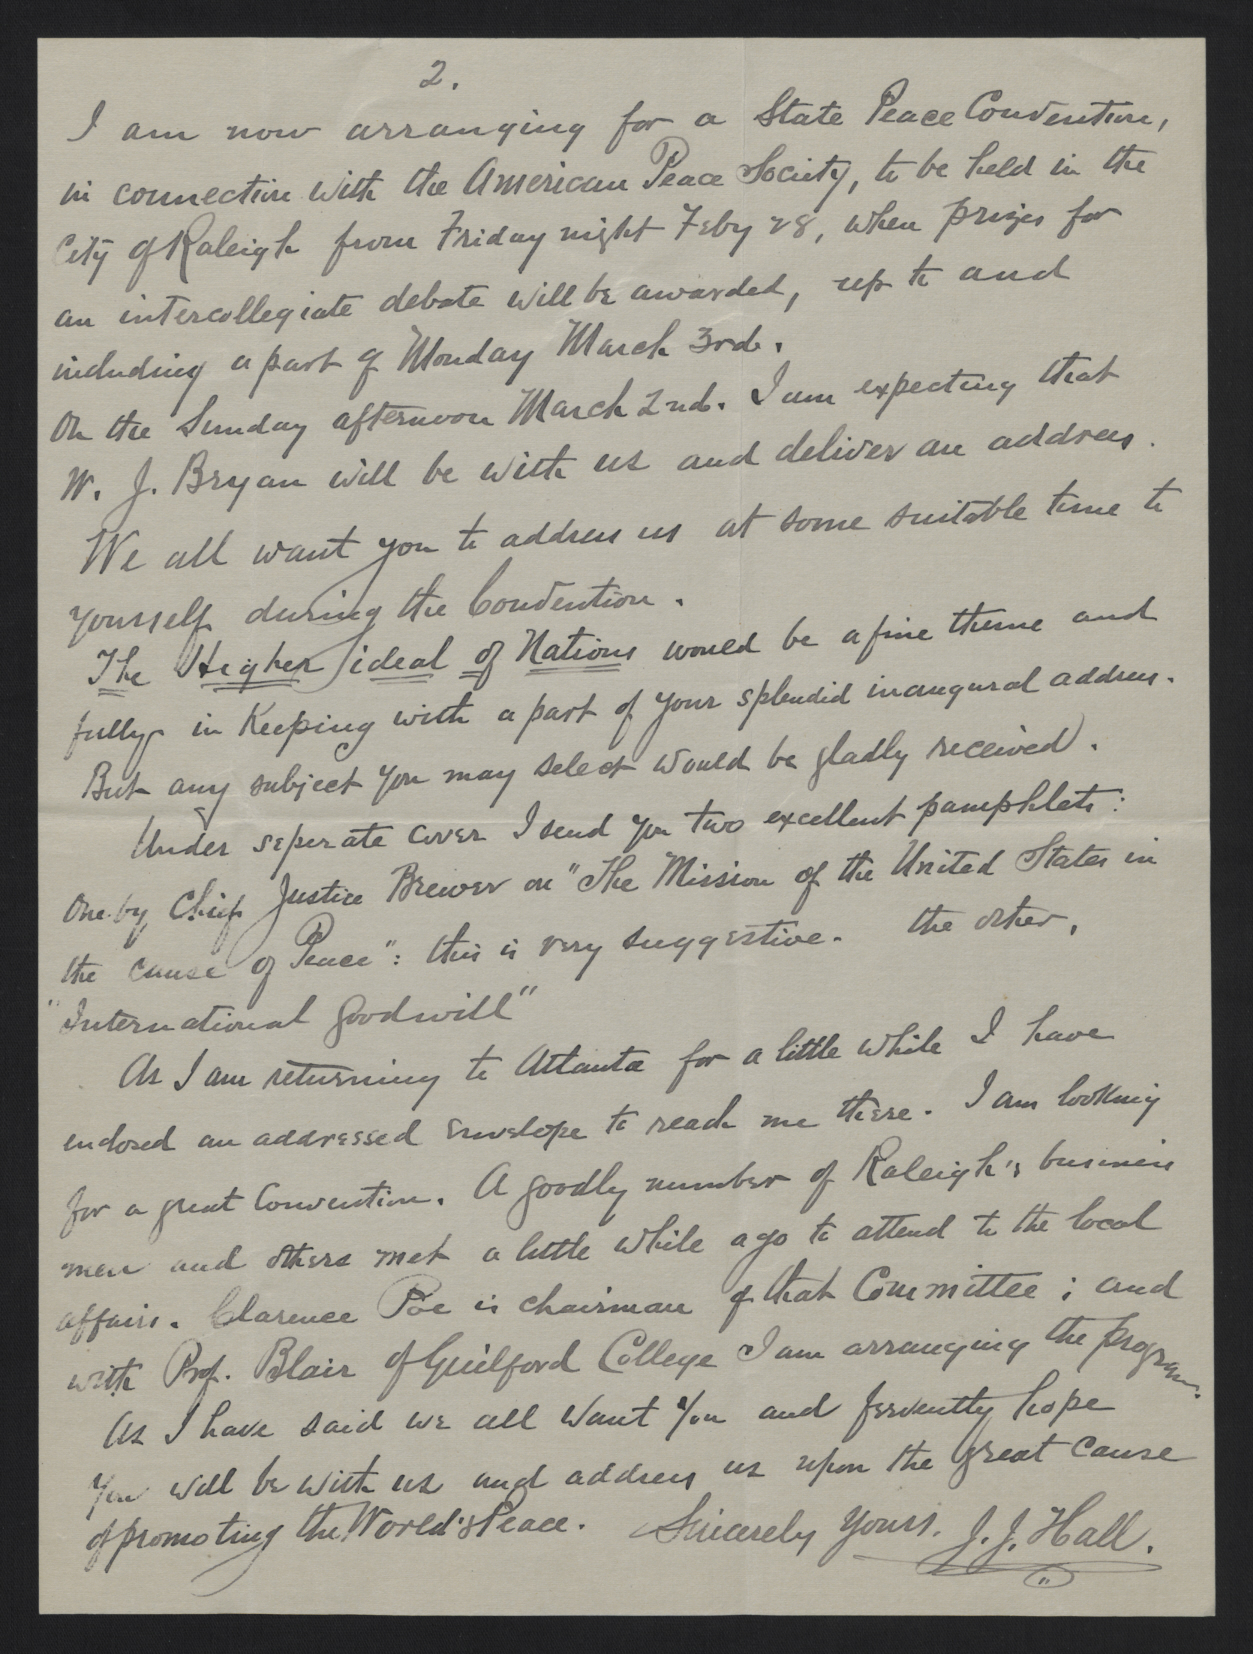 Letter from Hall to Craig, January 18, 1913, page 2